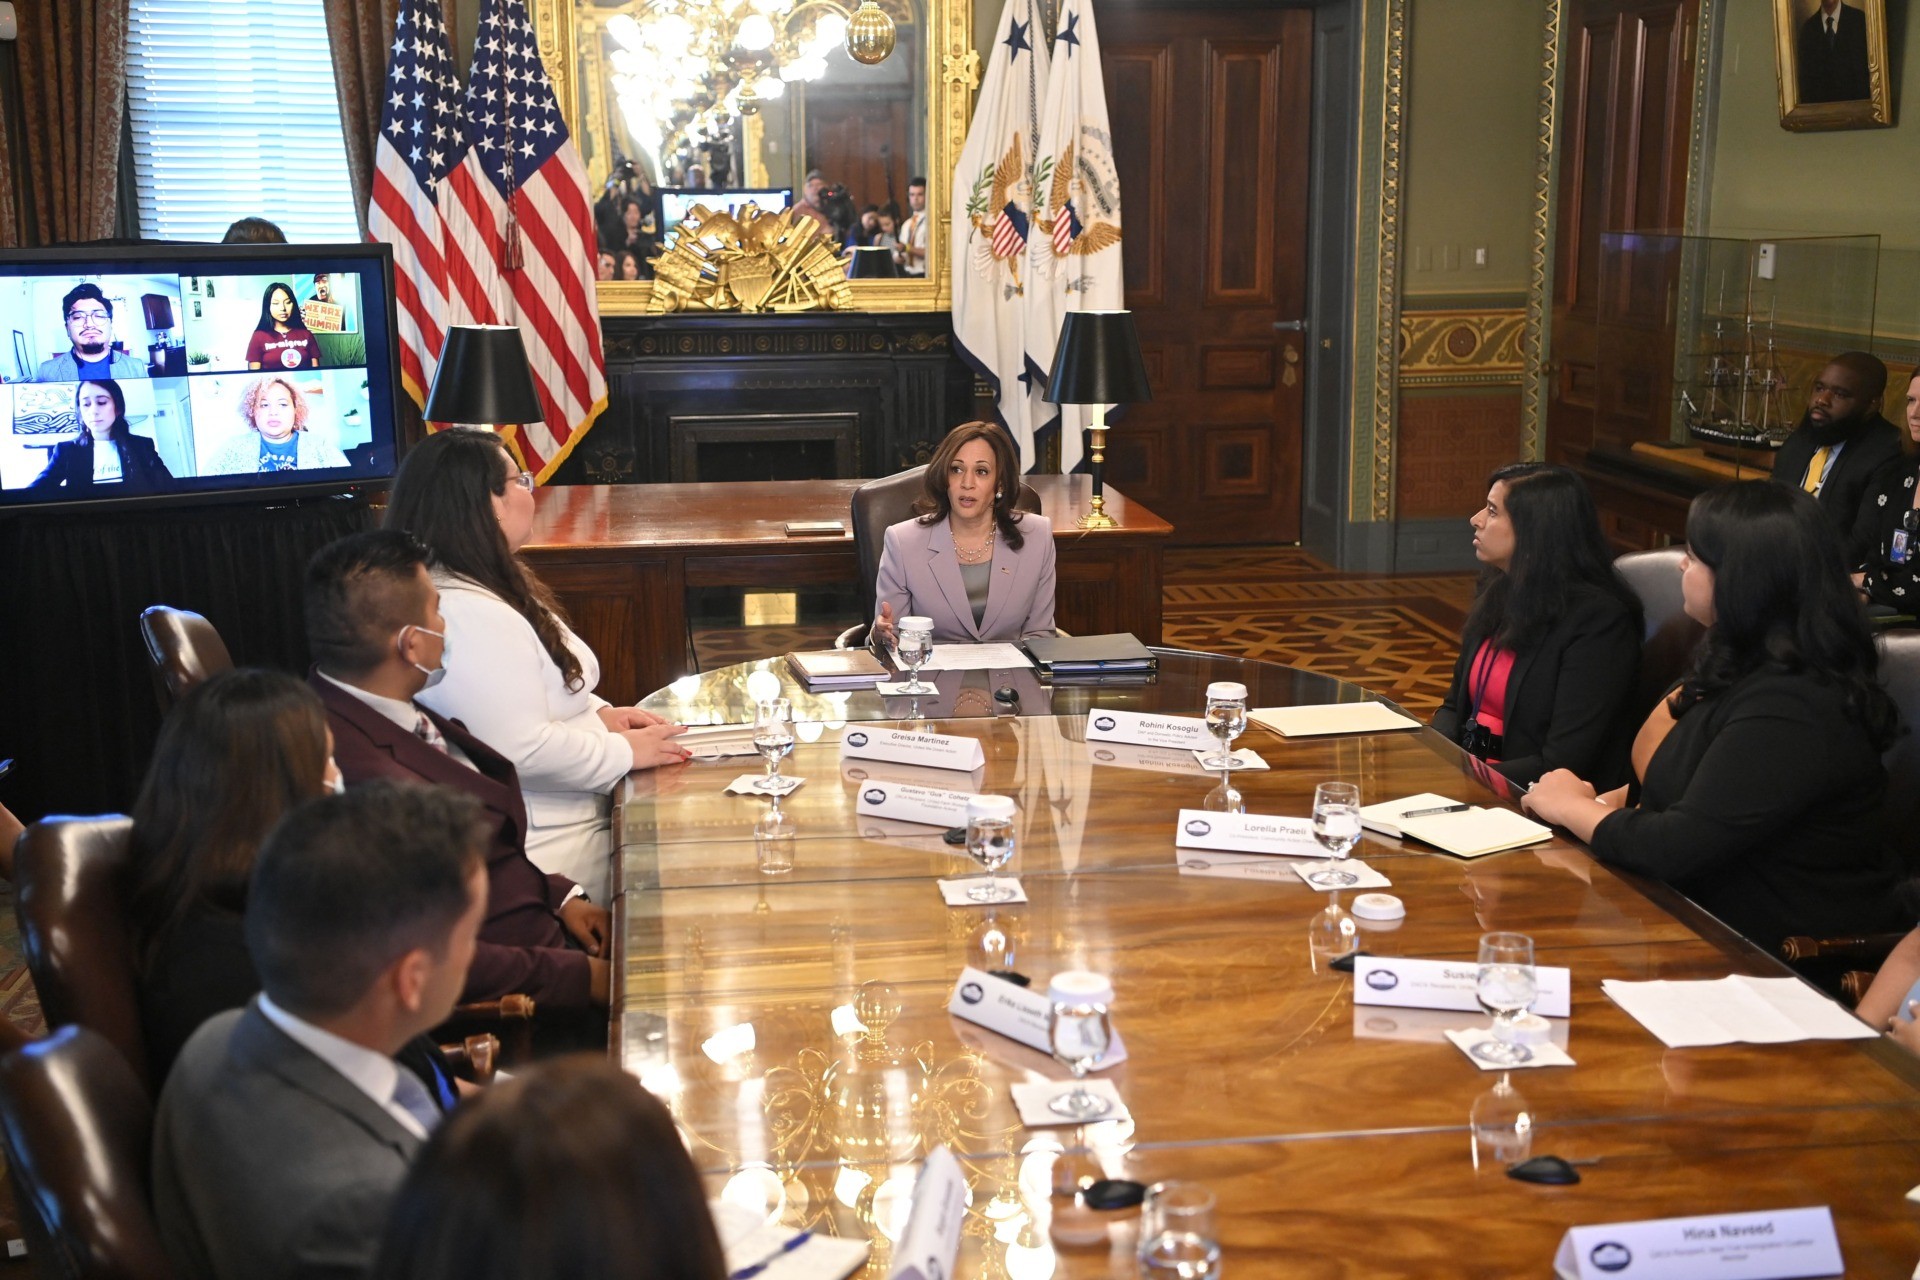 US Vice President Kamala Harris (C) speaks during a discussion with Deferred Action for Childhood Arrivals (DACA) stakeholders in her ceremonial office in the Eisenhower Executive Office Building, next to the White House in Washington, DC on July 22, 2021. (Photo by MANDEL NGAN / AFP) (Photo by MANDEL NGAN/AFP via Getty Images)